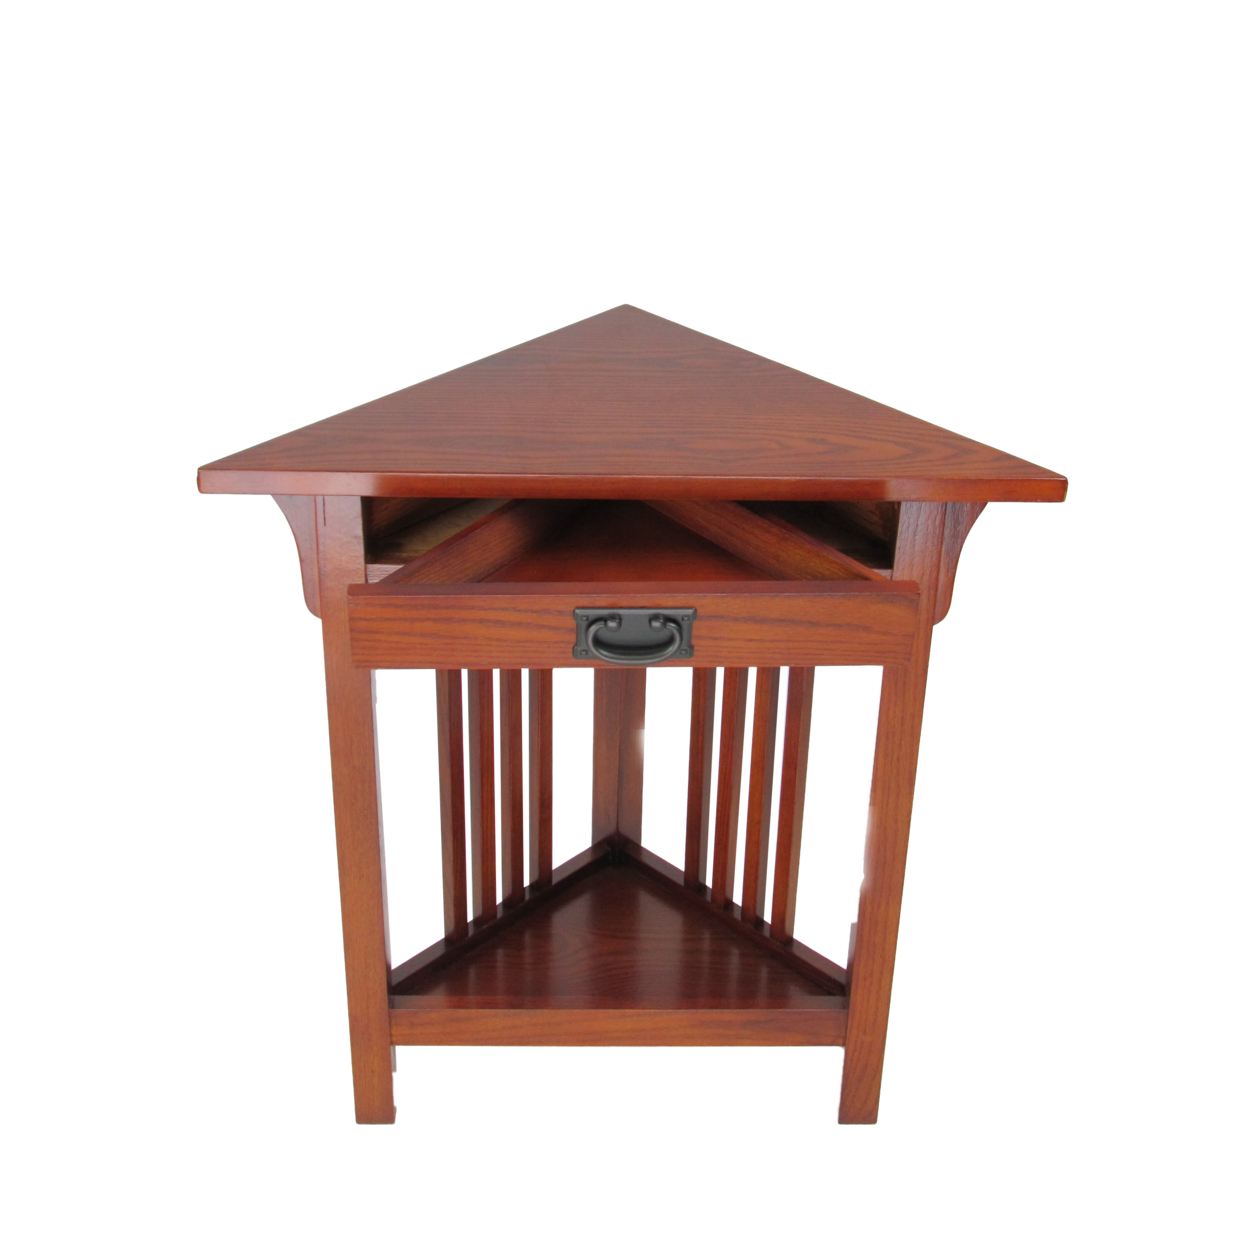 Mission Style Wooden Corner Table With 1 Drawer And Bottom Shelf, Brown- Saltoro Sherpi